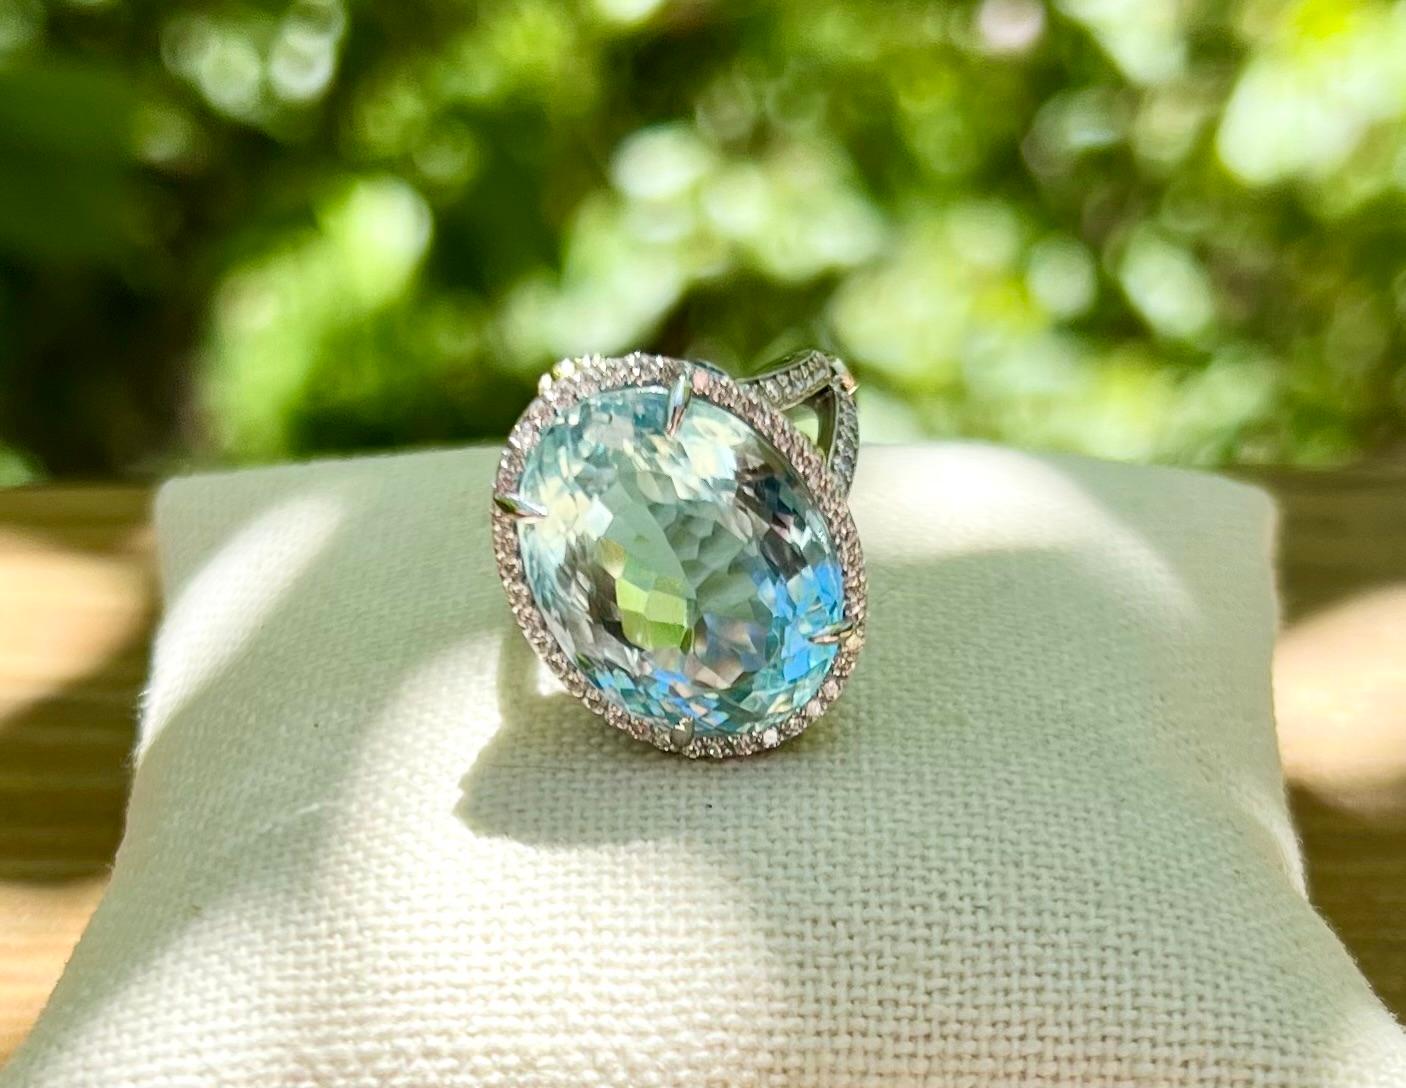 One 18 karat white gold (stamped 18K) ring by Stambolian, set with one 20. carat oval aquamarine measuring 21mm x 16mm, surrounded by a halo of one hundred fourteen round brilliant cut diamonds, approximately 1.33-carat total weight with matching